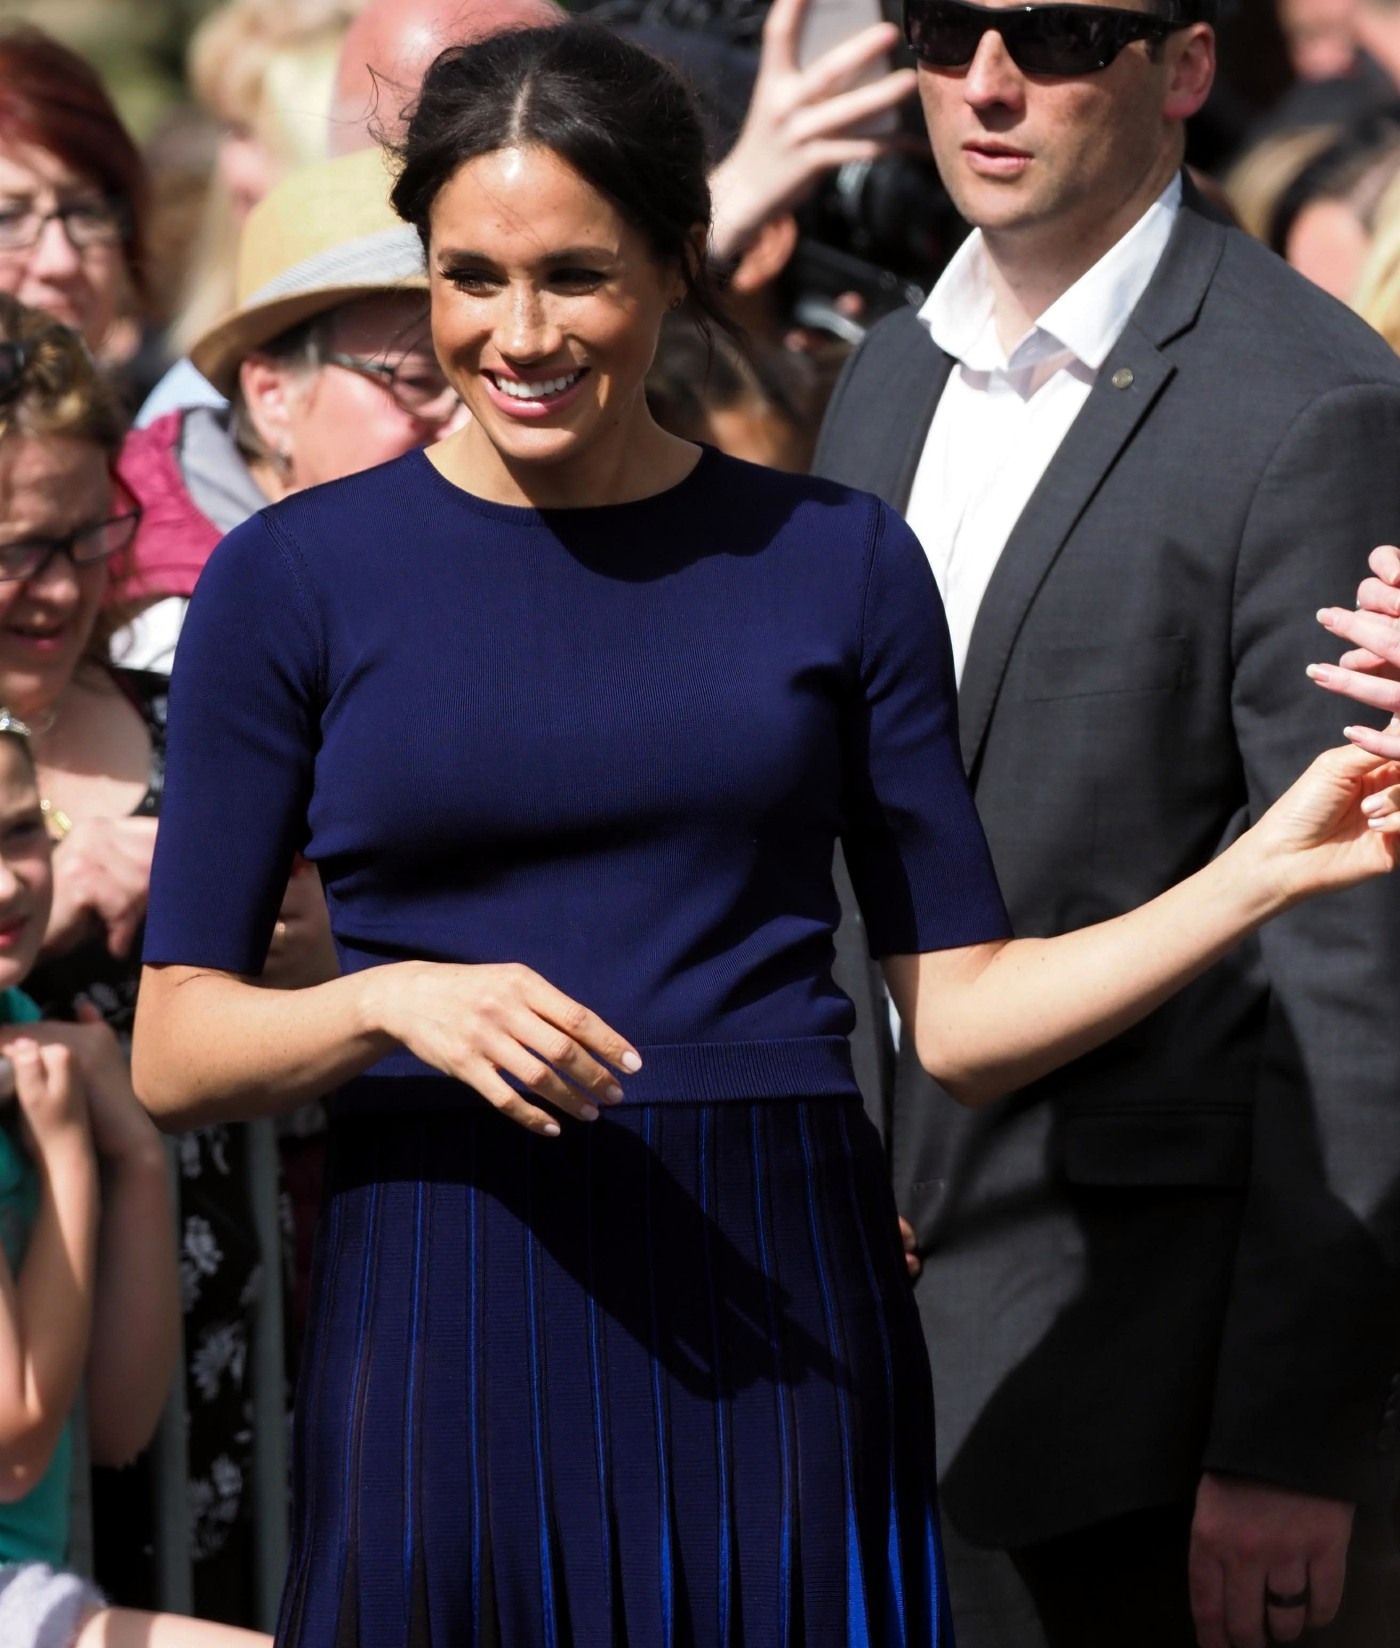 The Duke of Sussex and Duchess of Sussex greet crowds of well wishers in Rotorua, New Zealand.